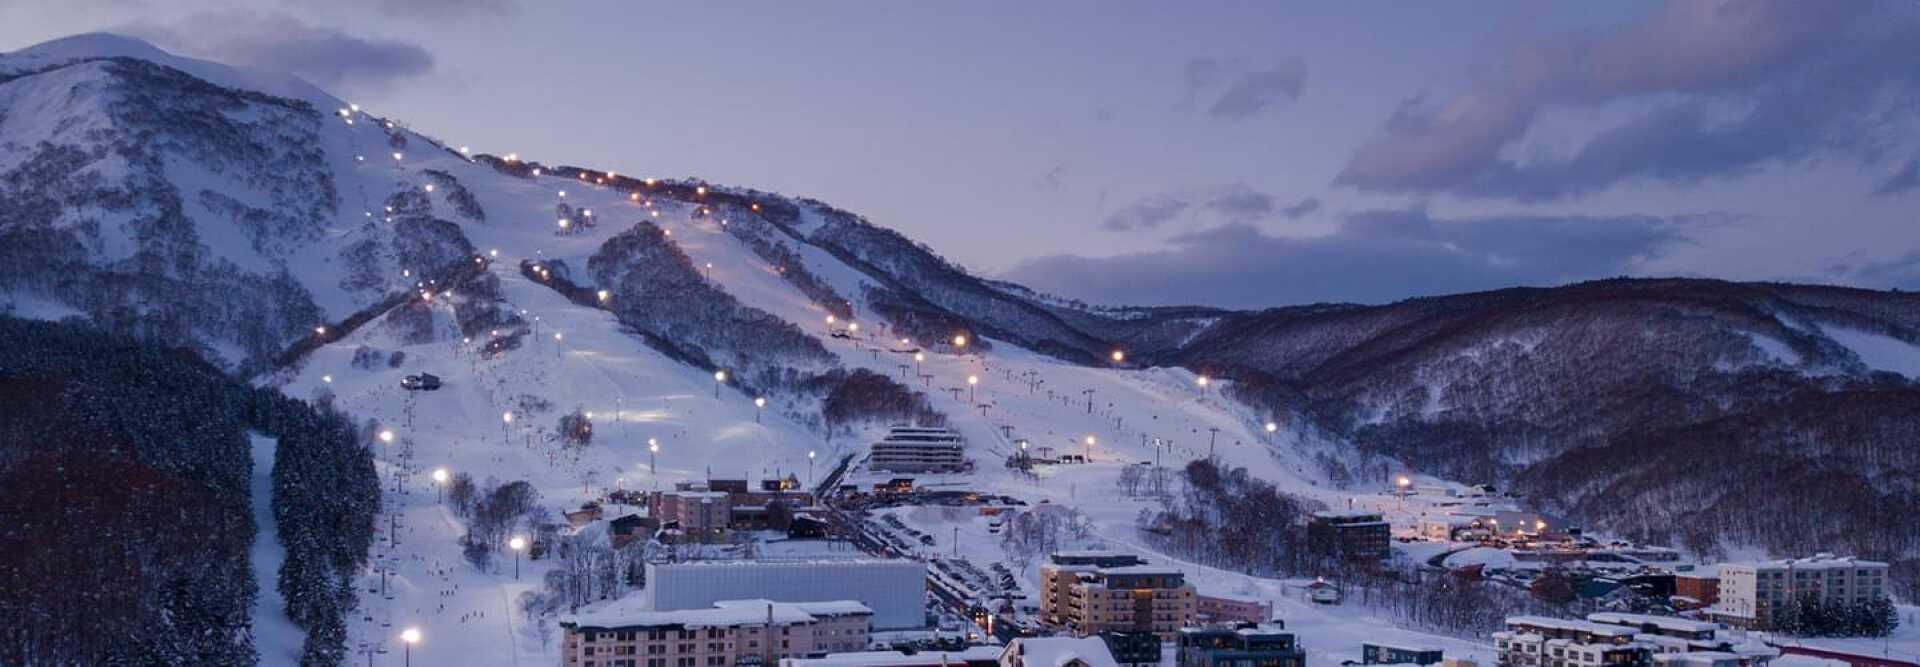 Aerial view of the ski slopes of Sapporo, Japan, in the evening darkness